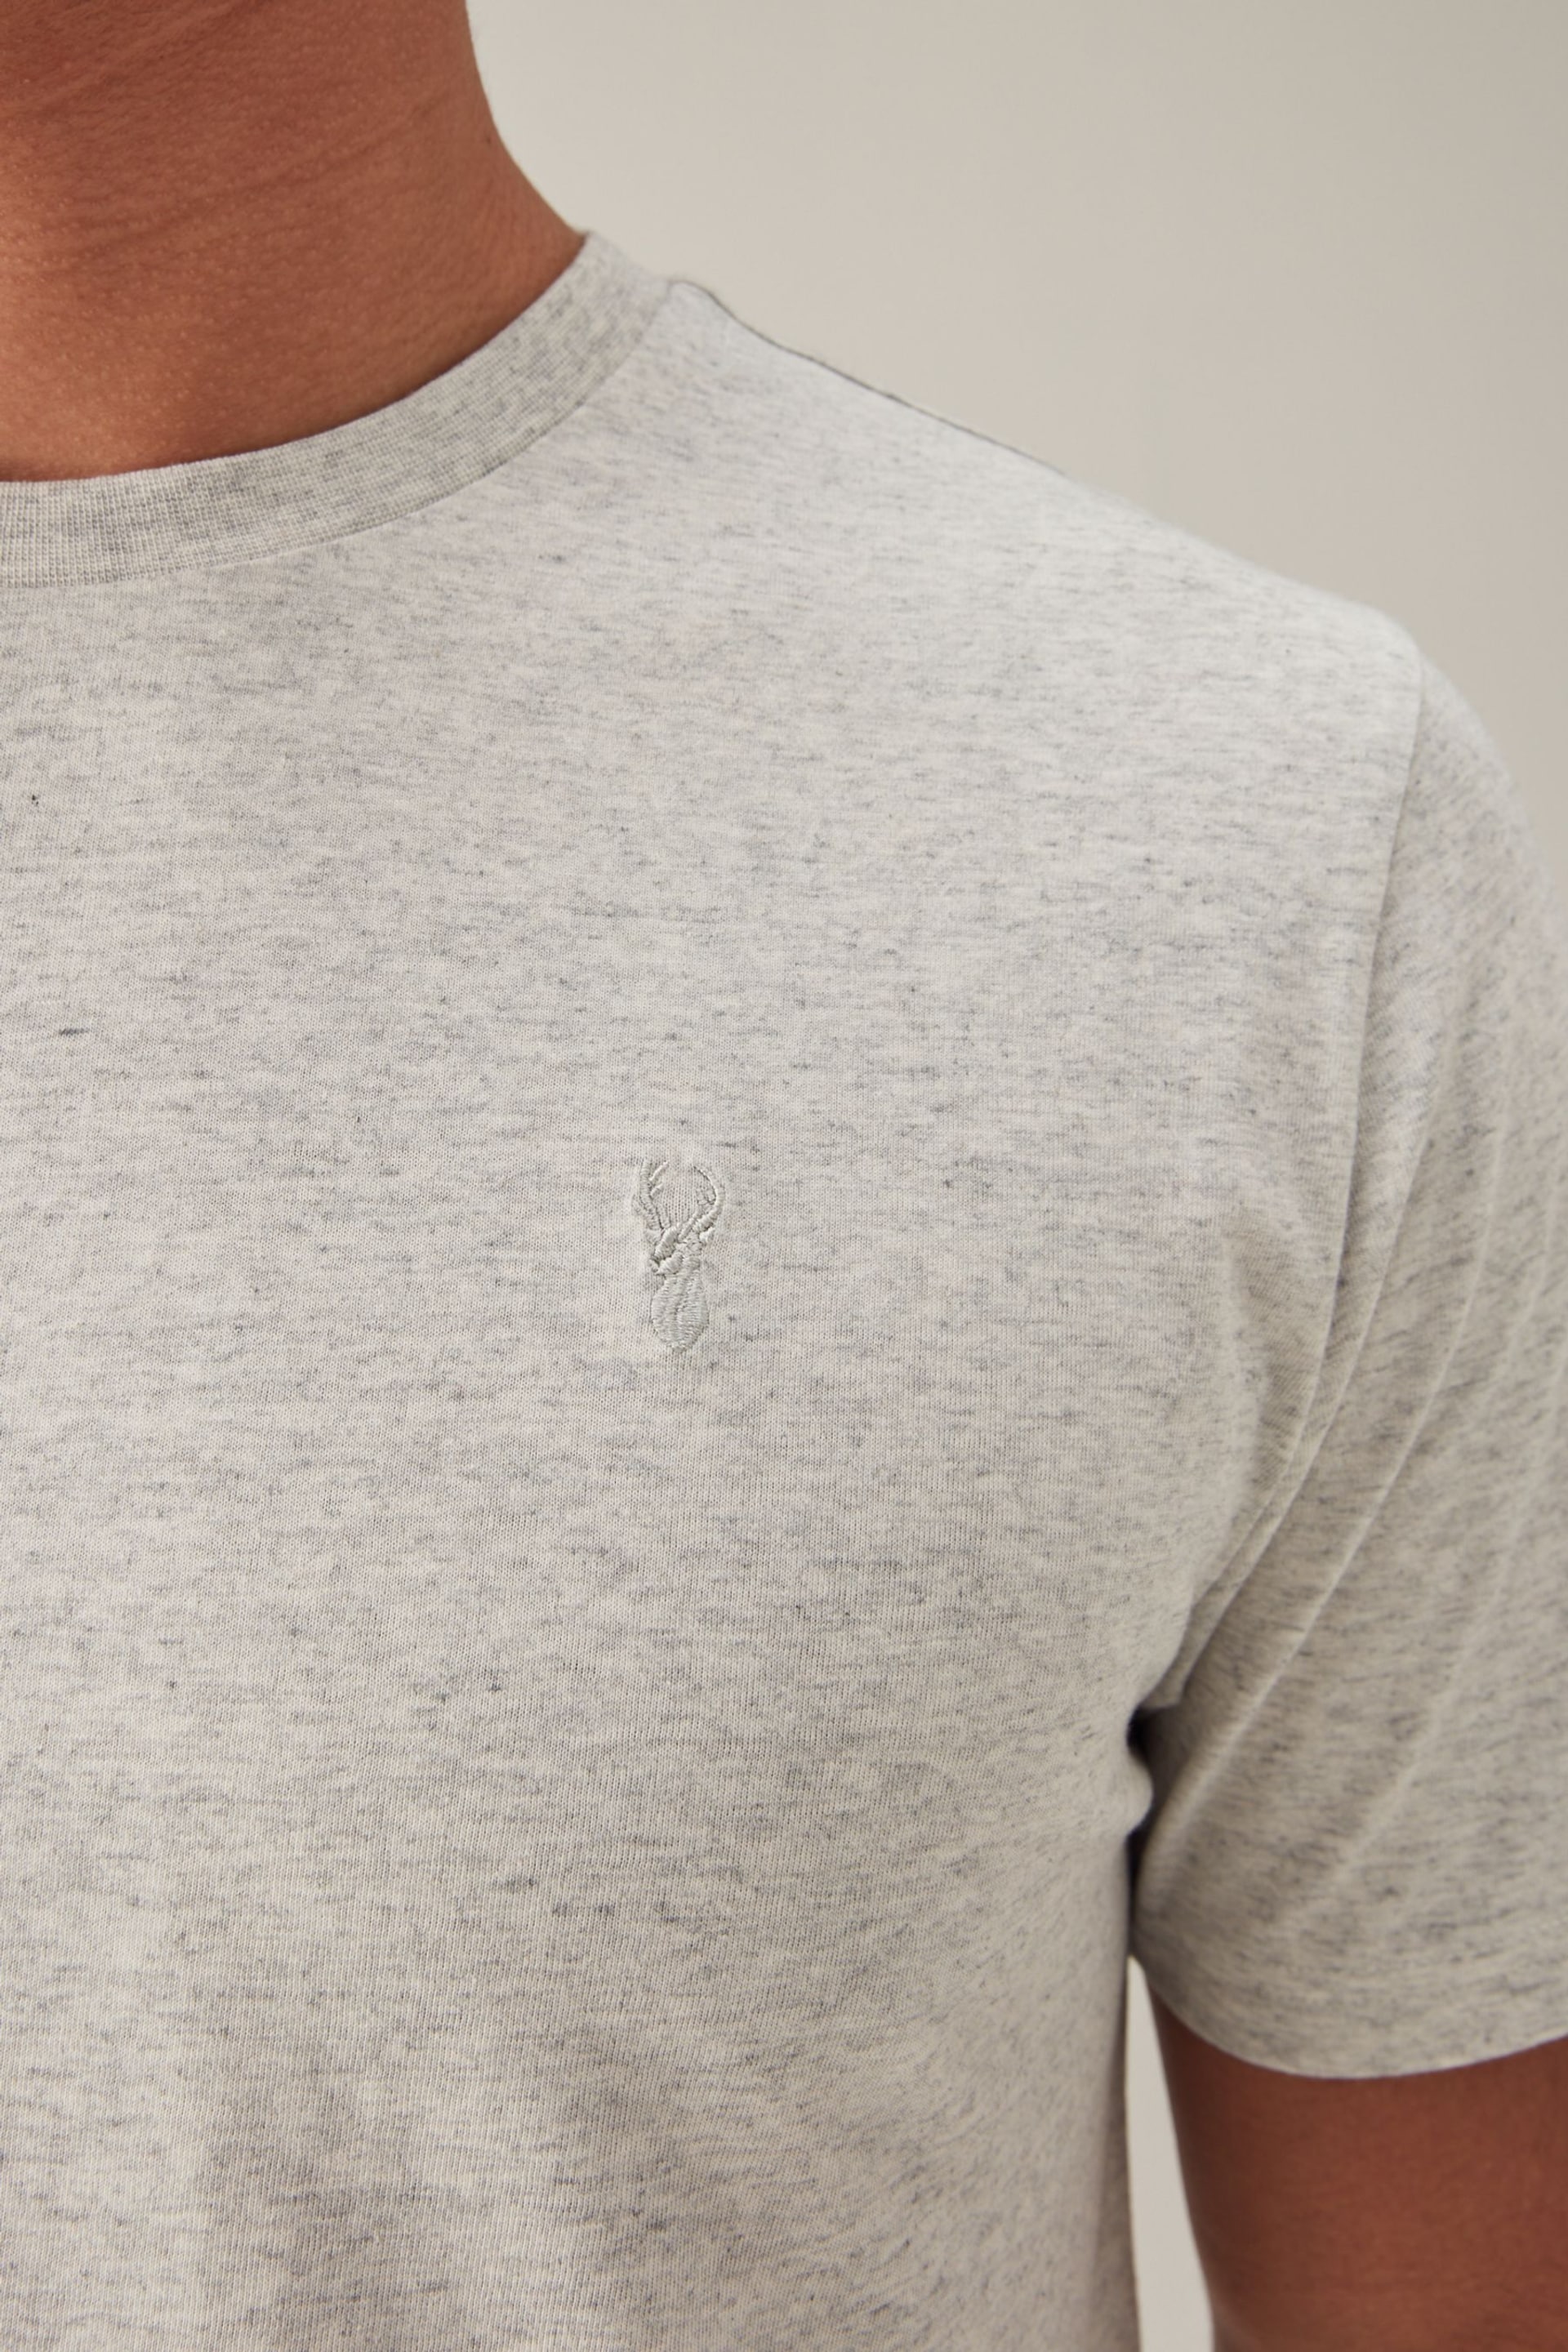 Grey Single Stag Marl T-Shirt - Image 5 of 8